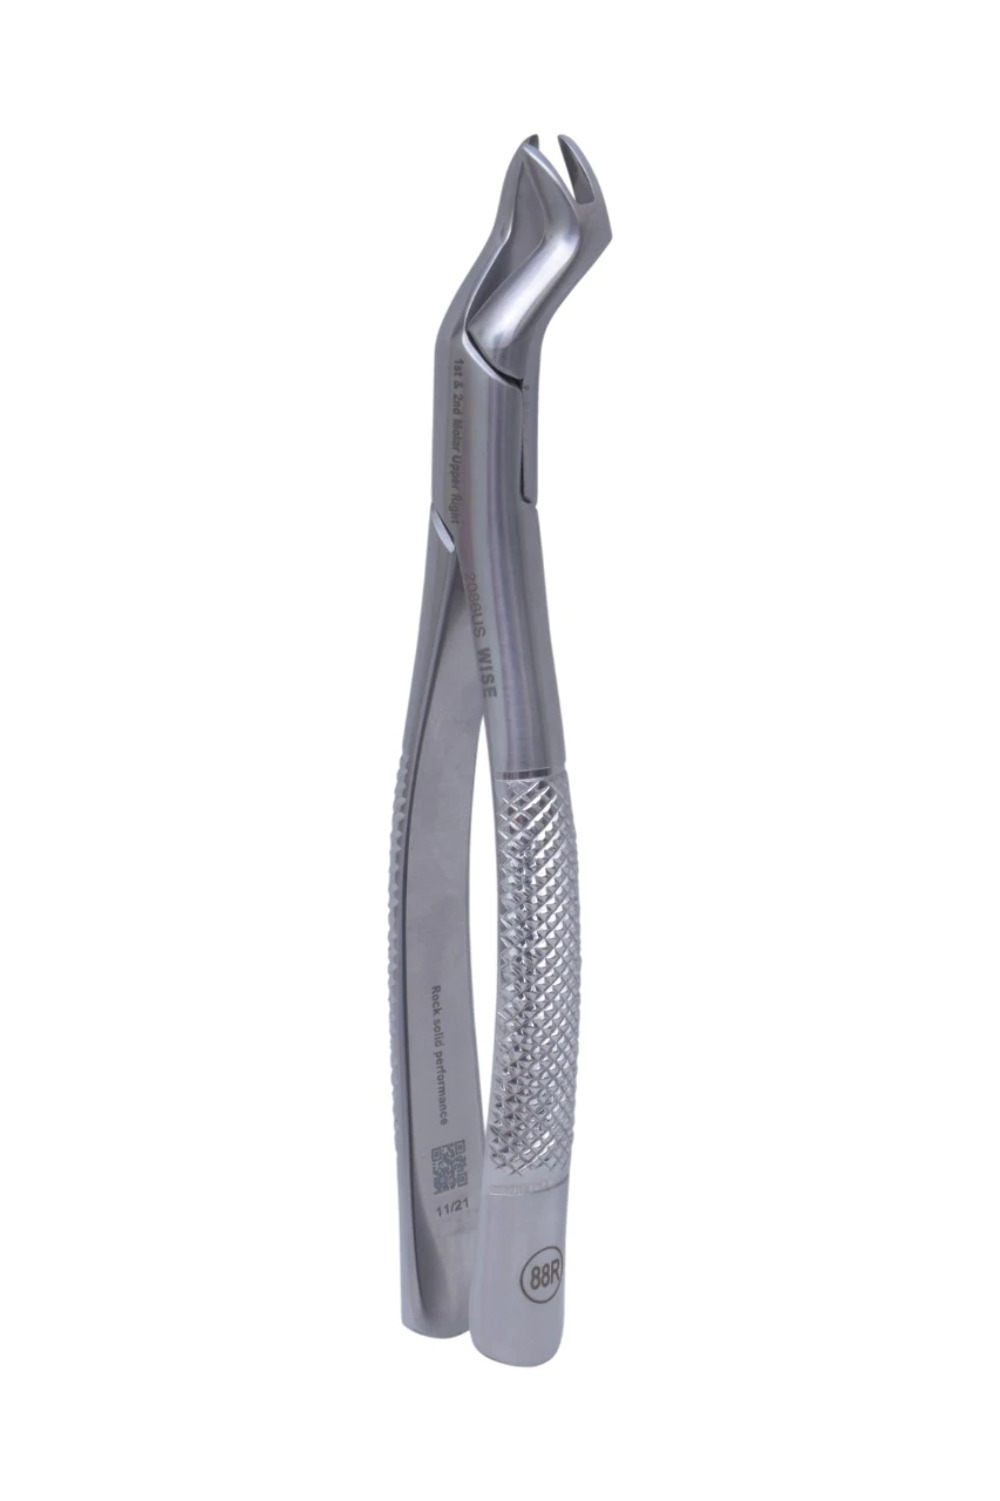 Wise Dental Surgical Extraction forceps # 88R. Nevius American Style